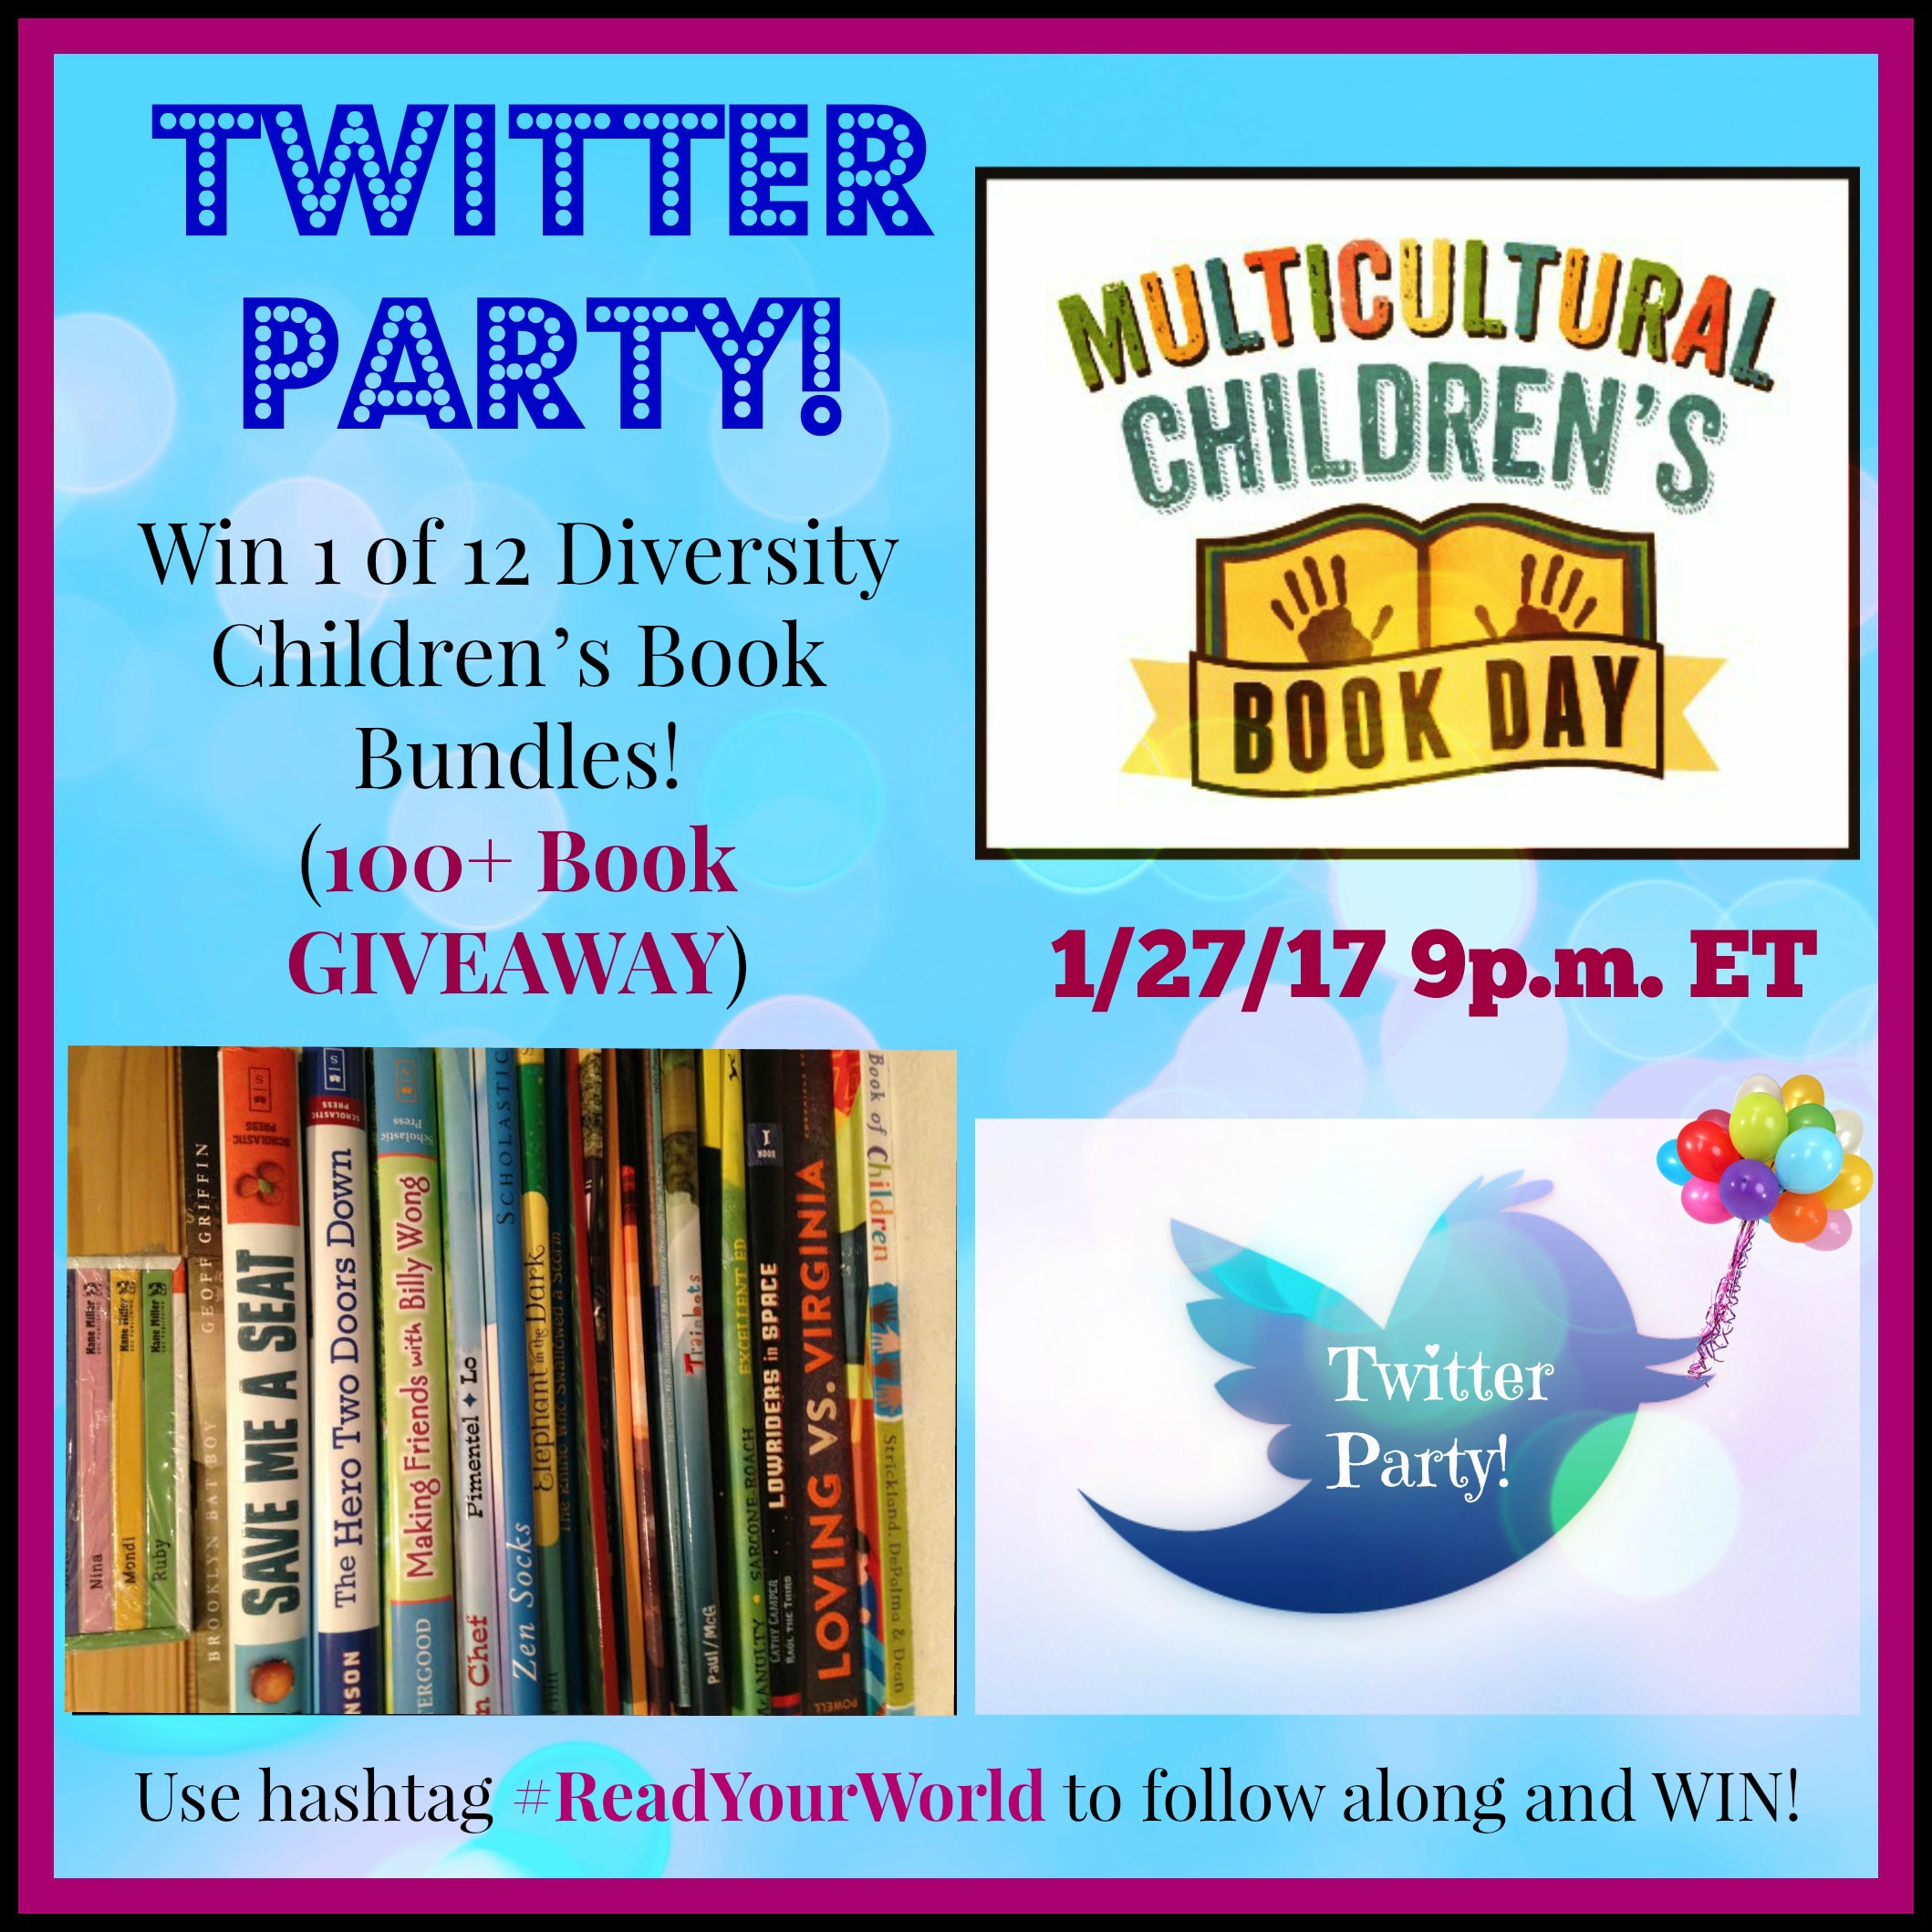 Multicultural Children's Book Day Twitter Party 2017 and book giveaways!